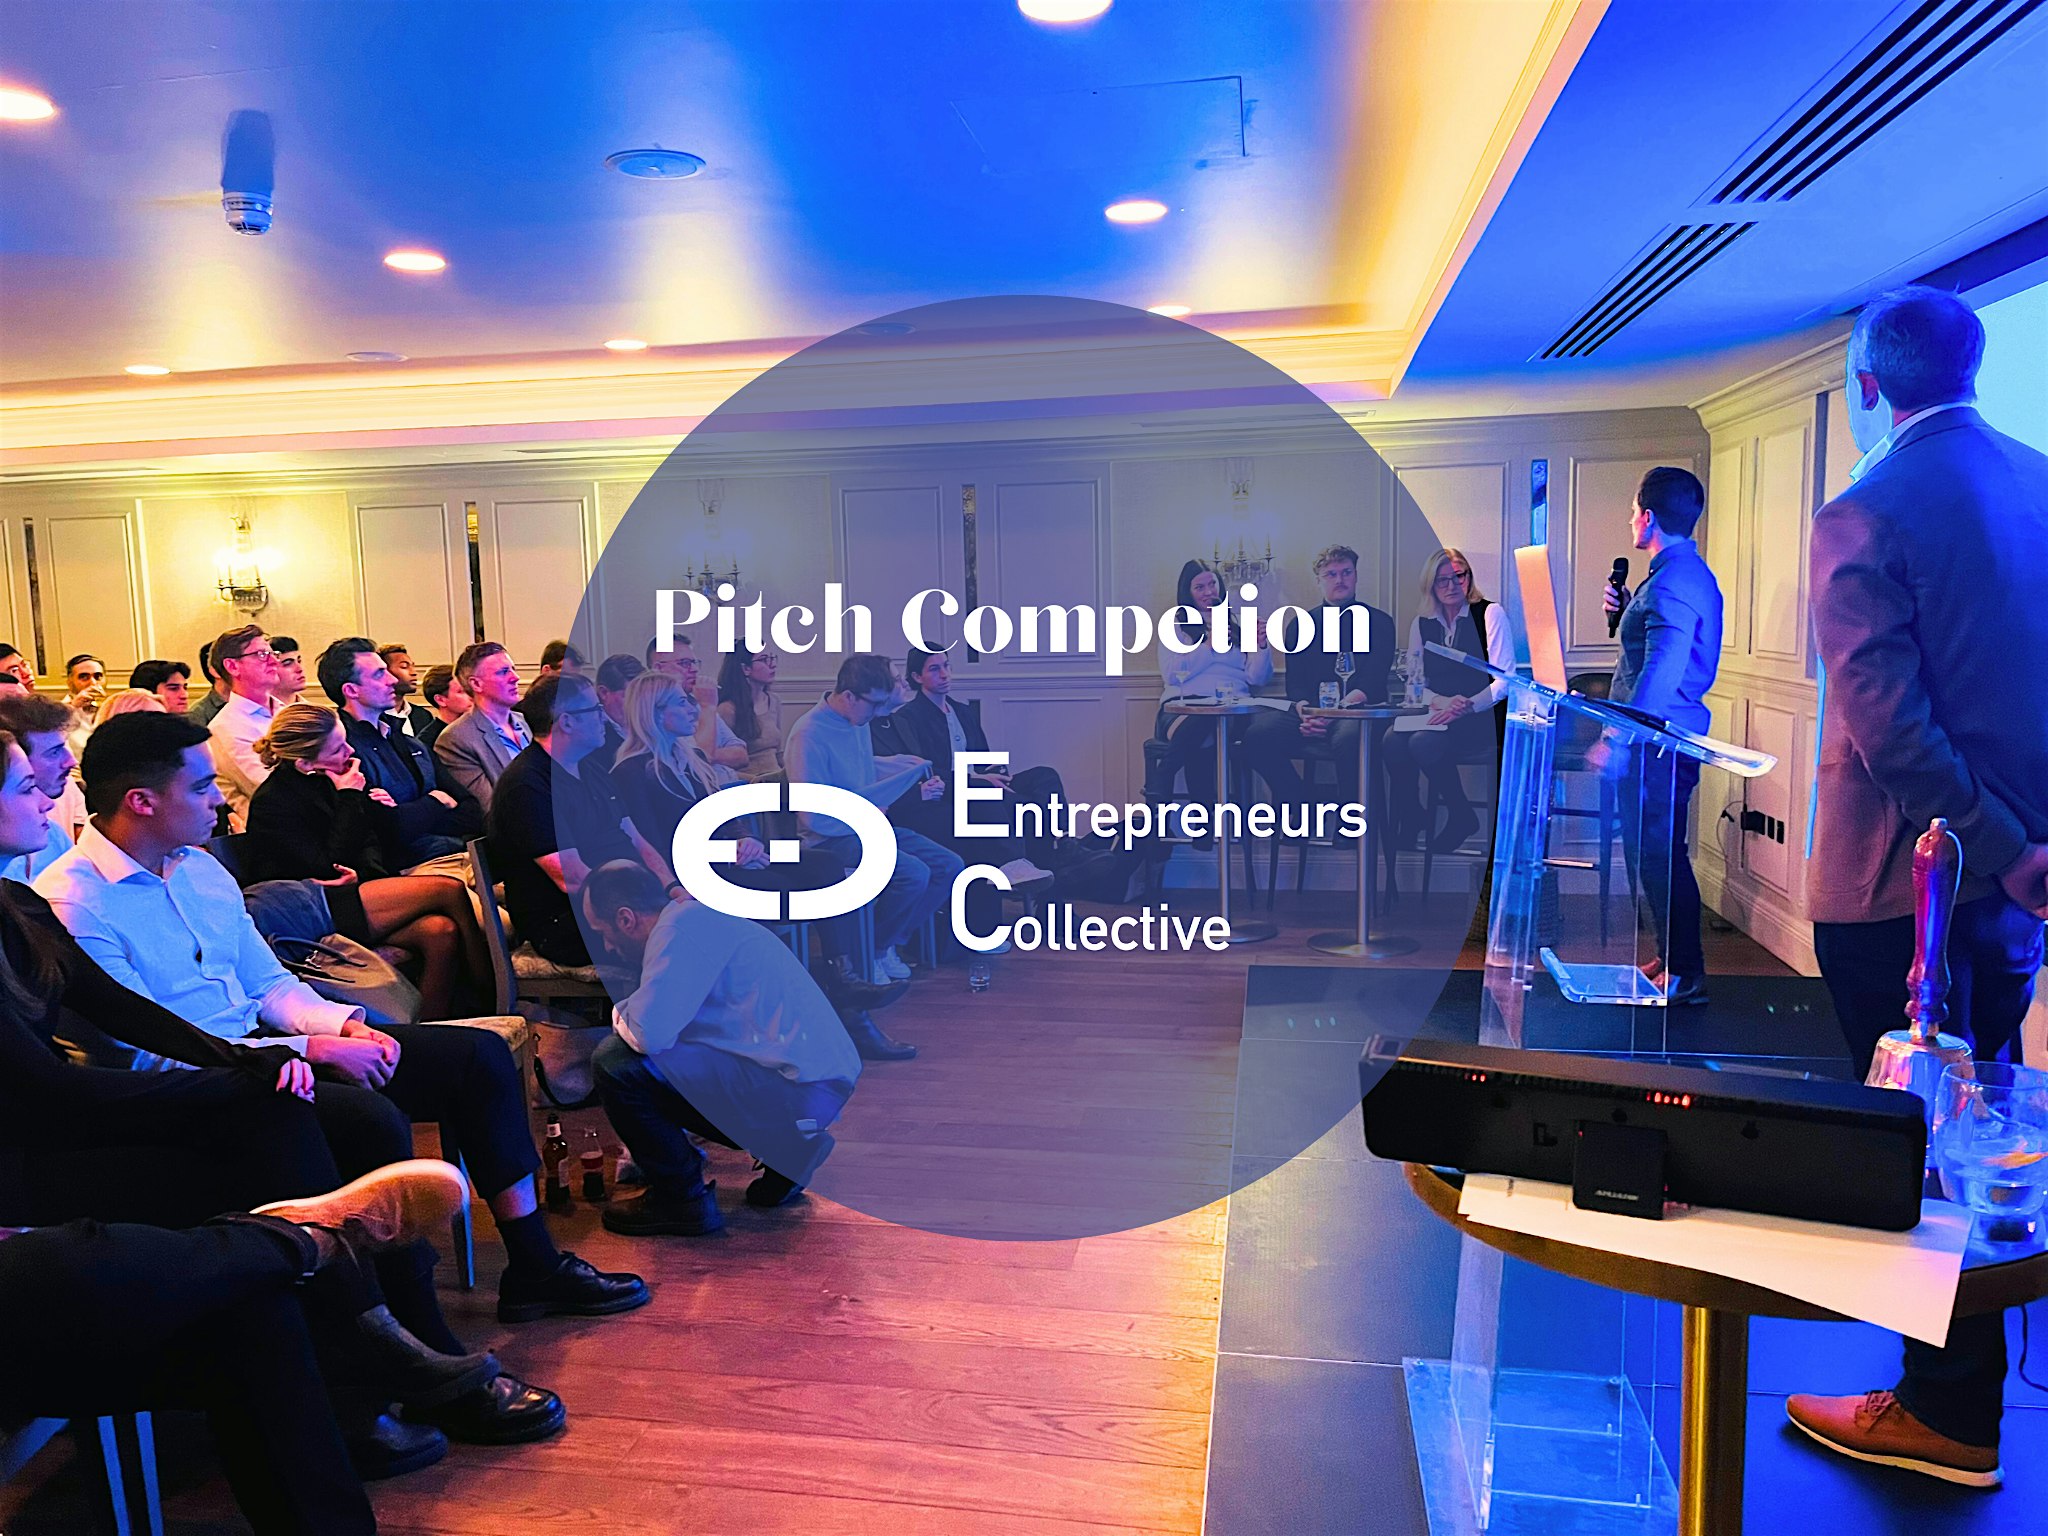 London Tech StartUp Founders Pitch Competition with Angel Investors & VC’s